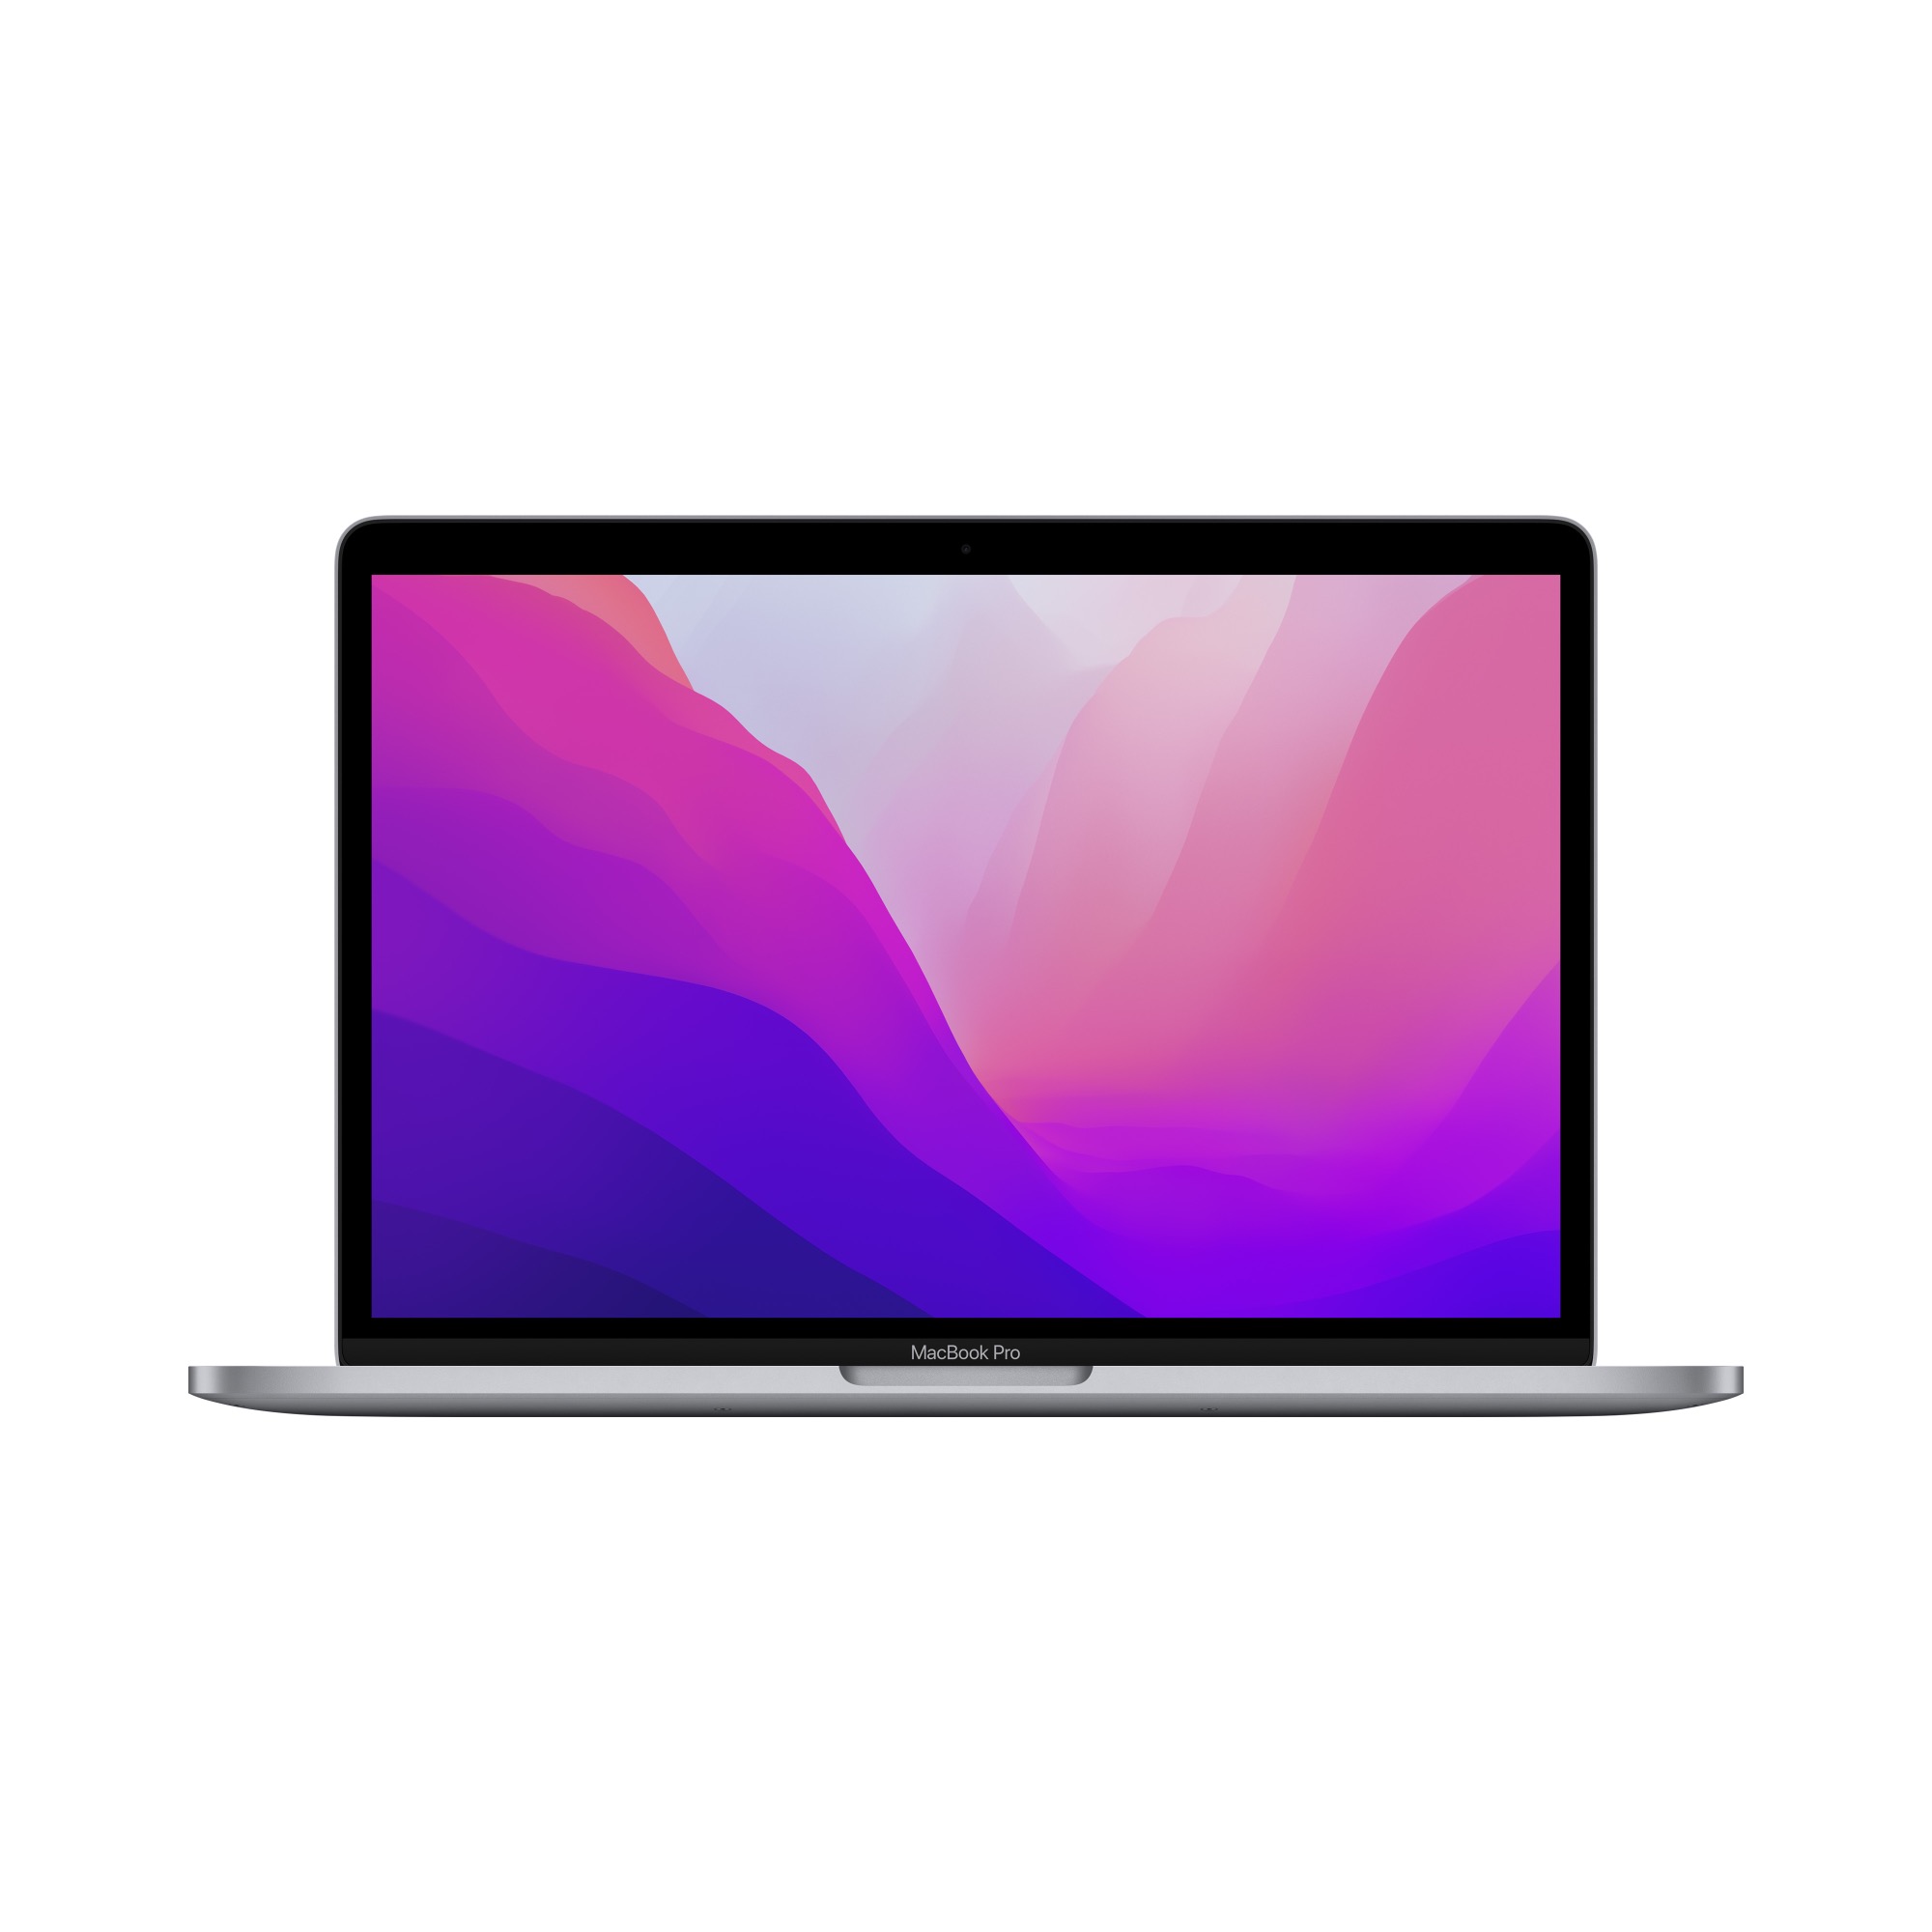 APPLE 13-inch MacBook Pro: Apple M2 chip with 8-core CPU and 10-core GPU, 256GB SSD